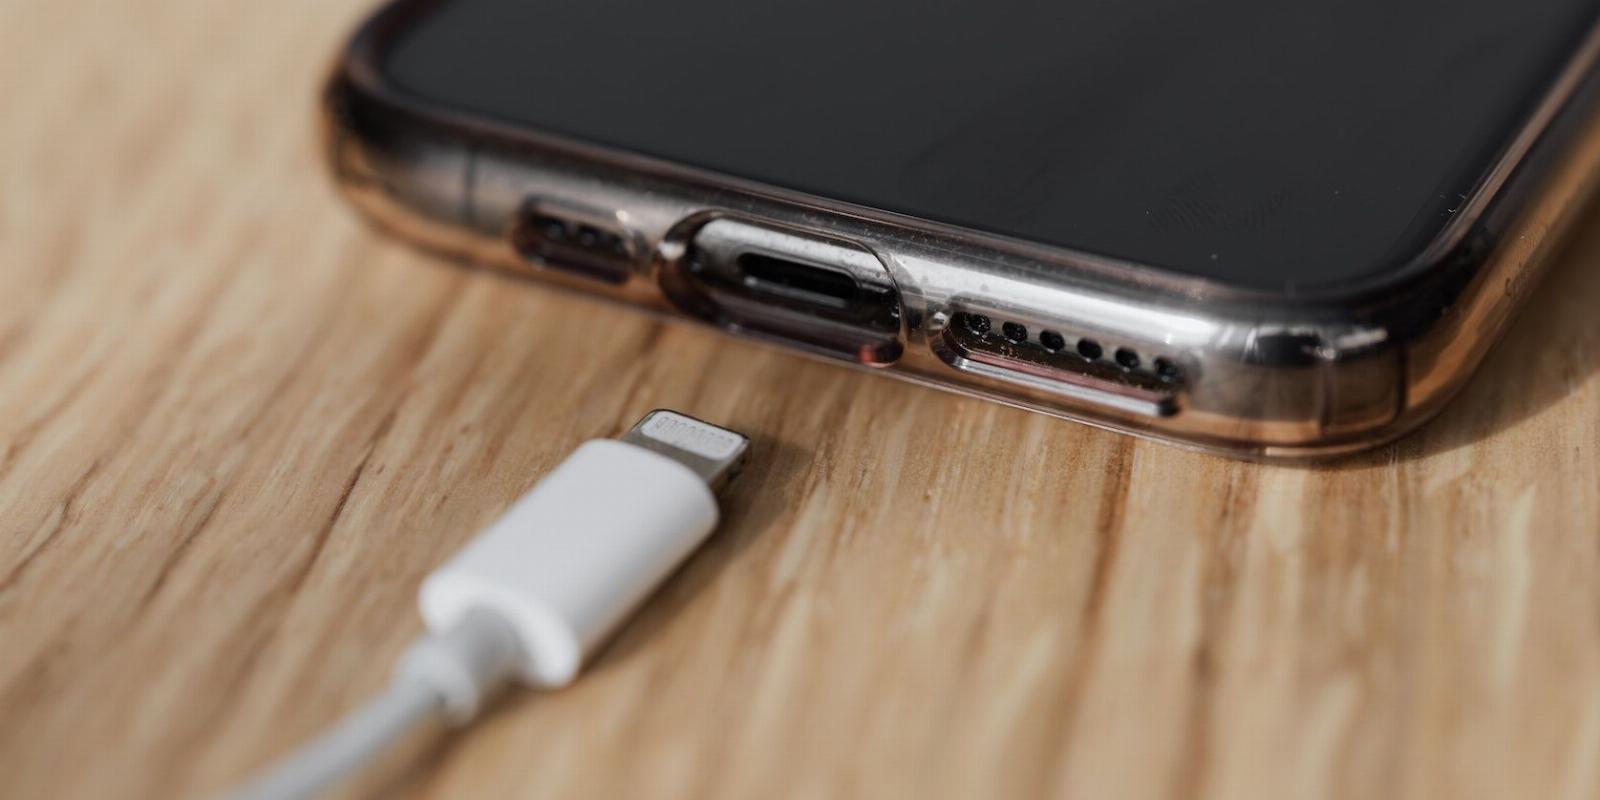 What Is Optimized Battery Charging on iPhone and Mac?